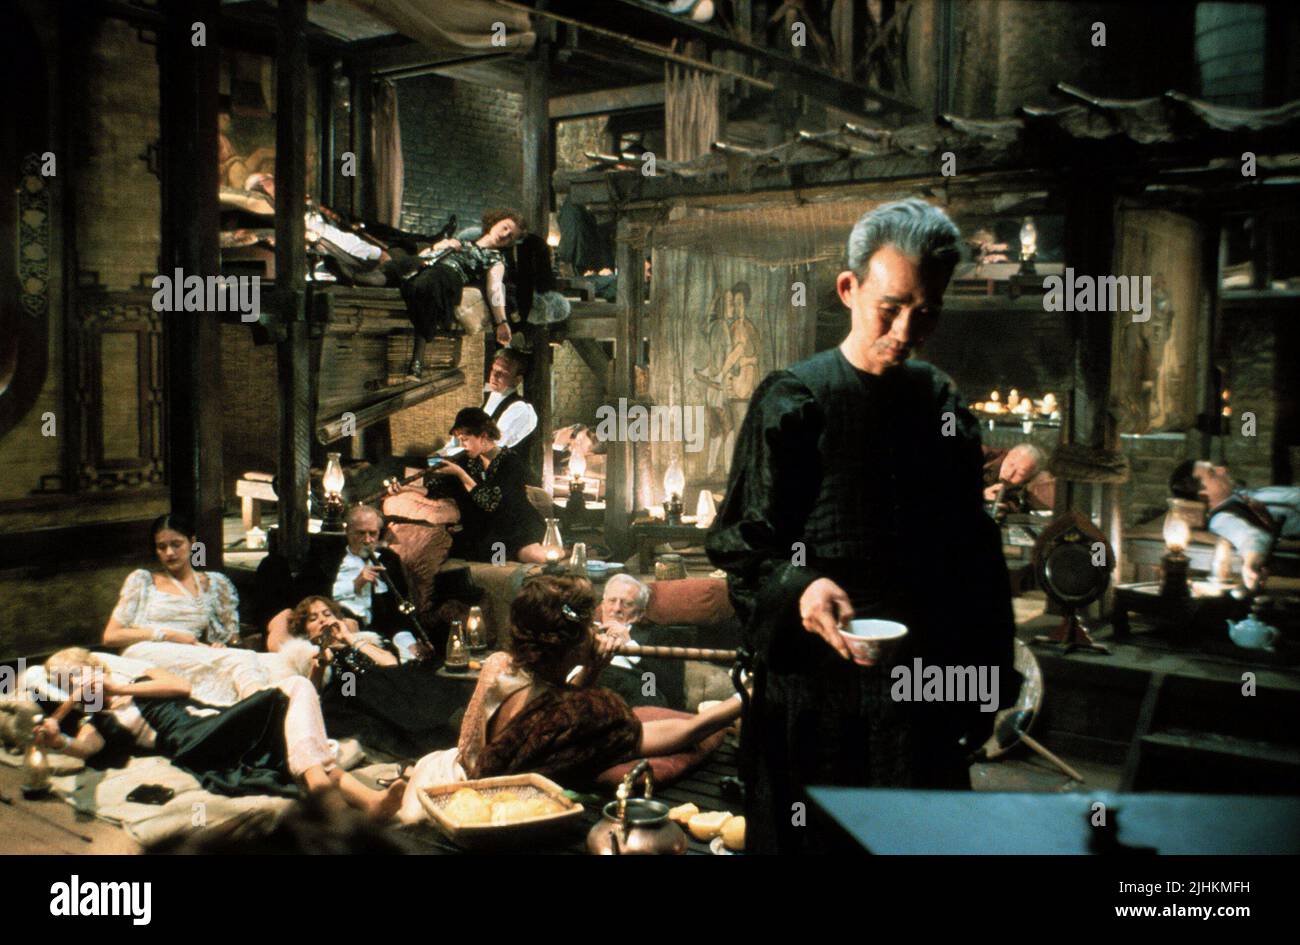 OPIUM DEN SCENE, ONCE UPON A TIME IN AMERICA, 1984 Stockfoto